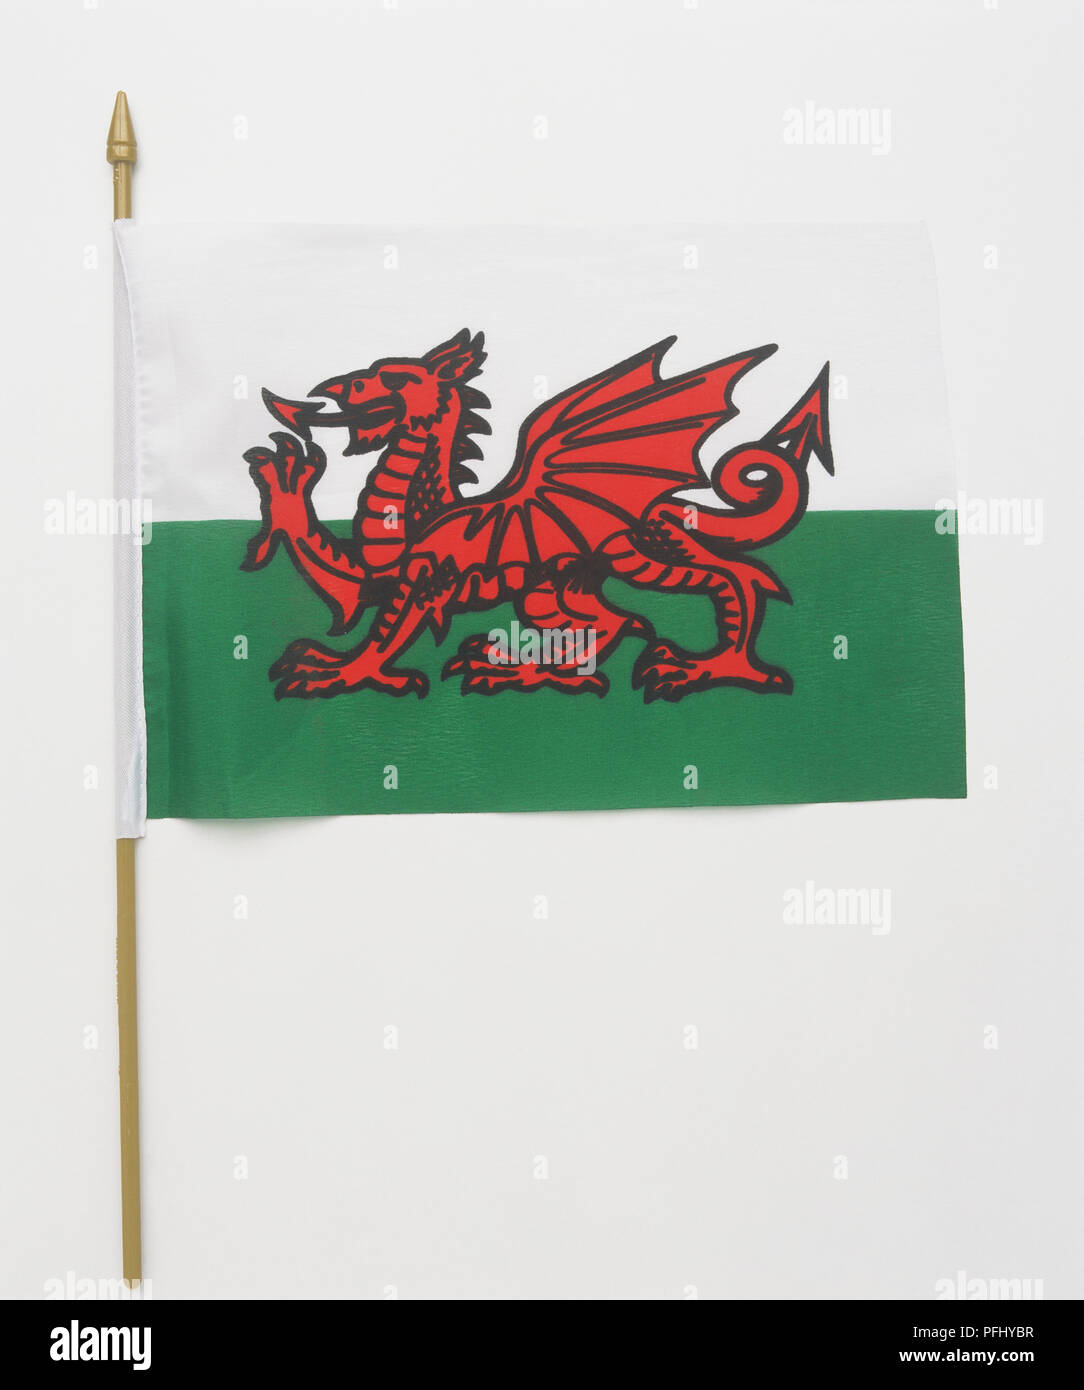 Welsh flag on gold plastic pole, front view. Stock Photo